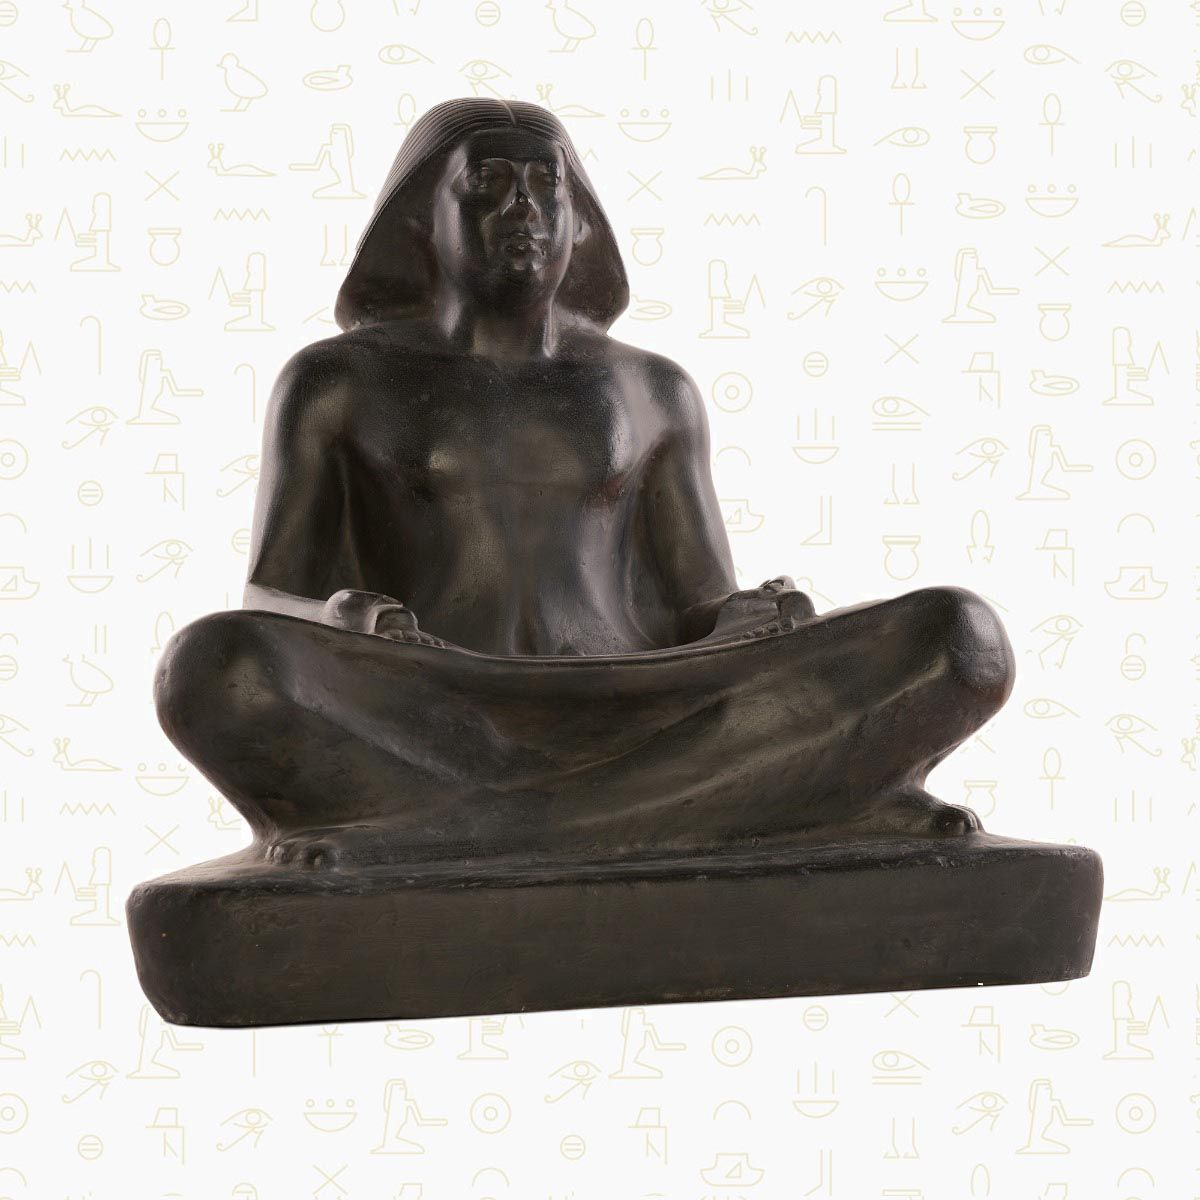 The Egyptian Scribe Statue